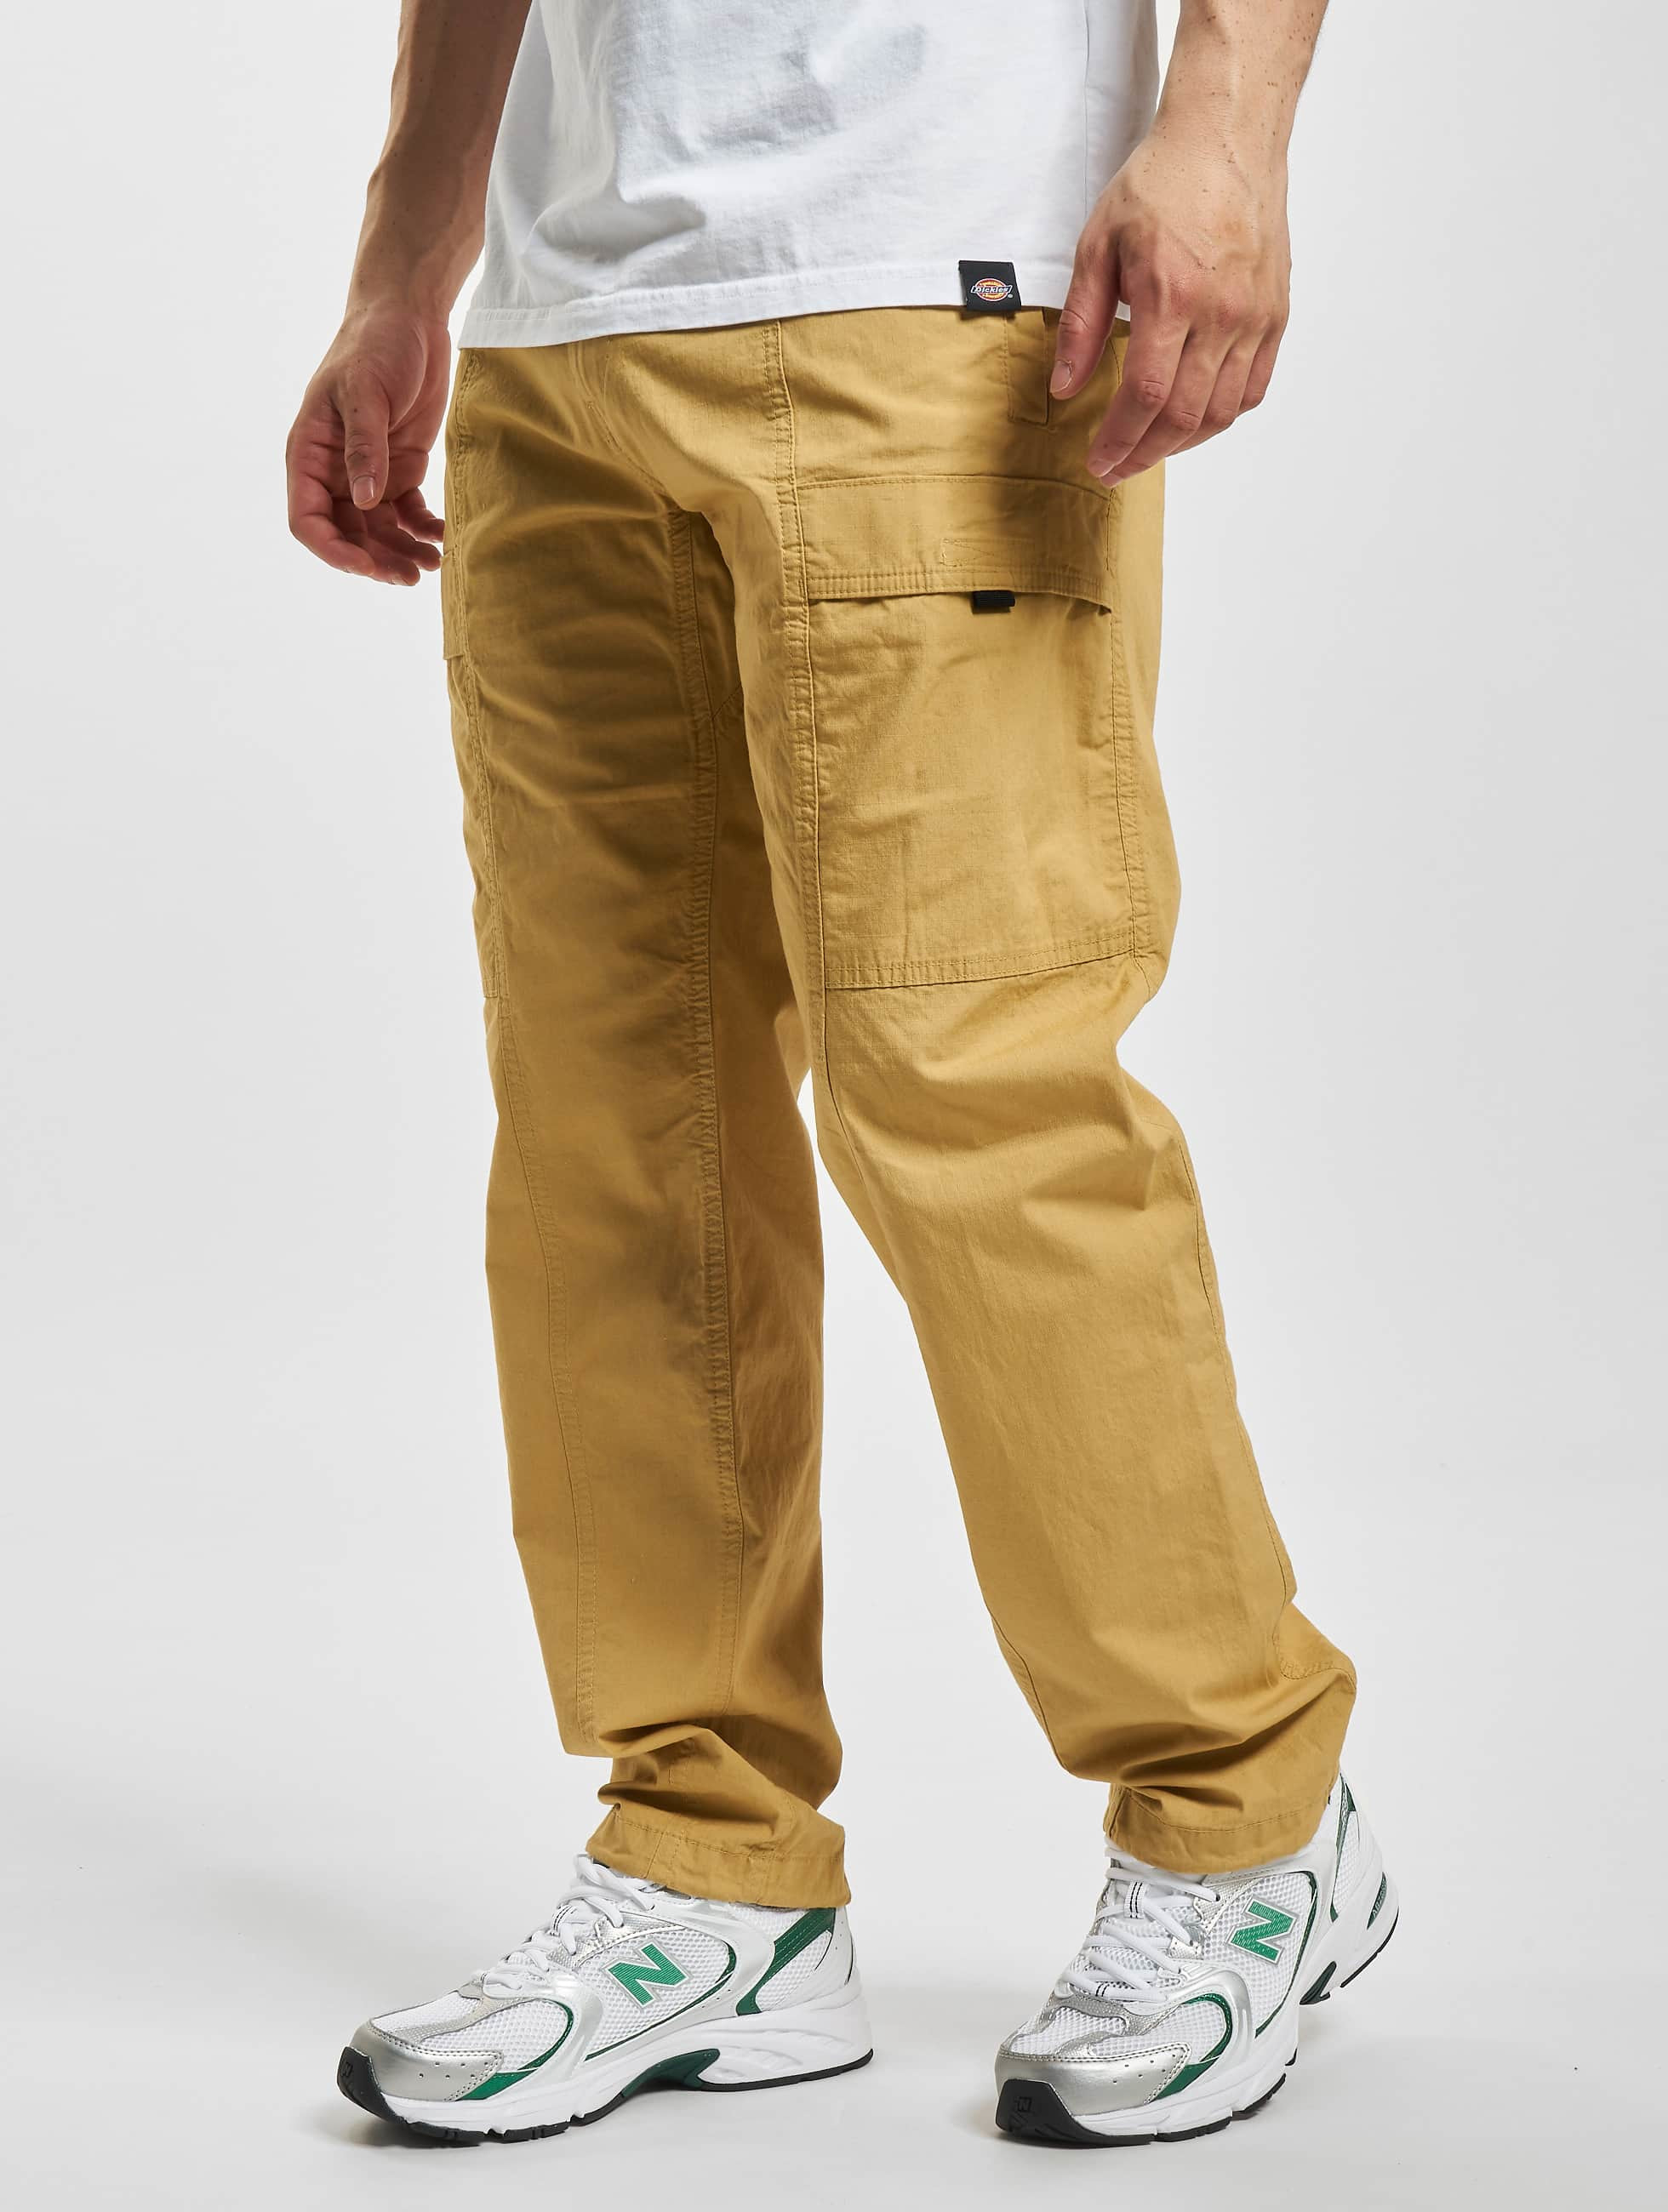 Top 61+ north face cargo trousers - in.cdgdbentre